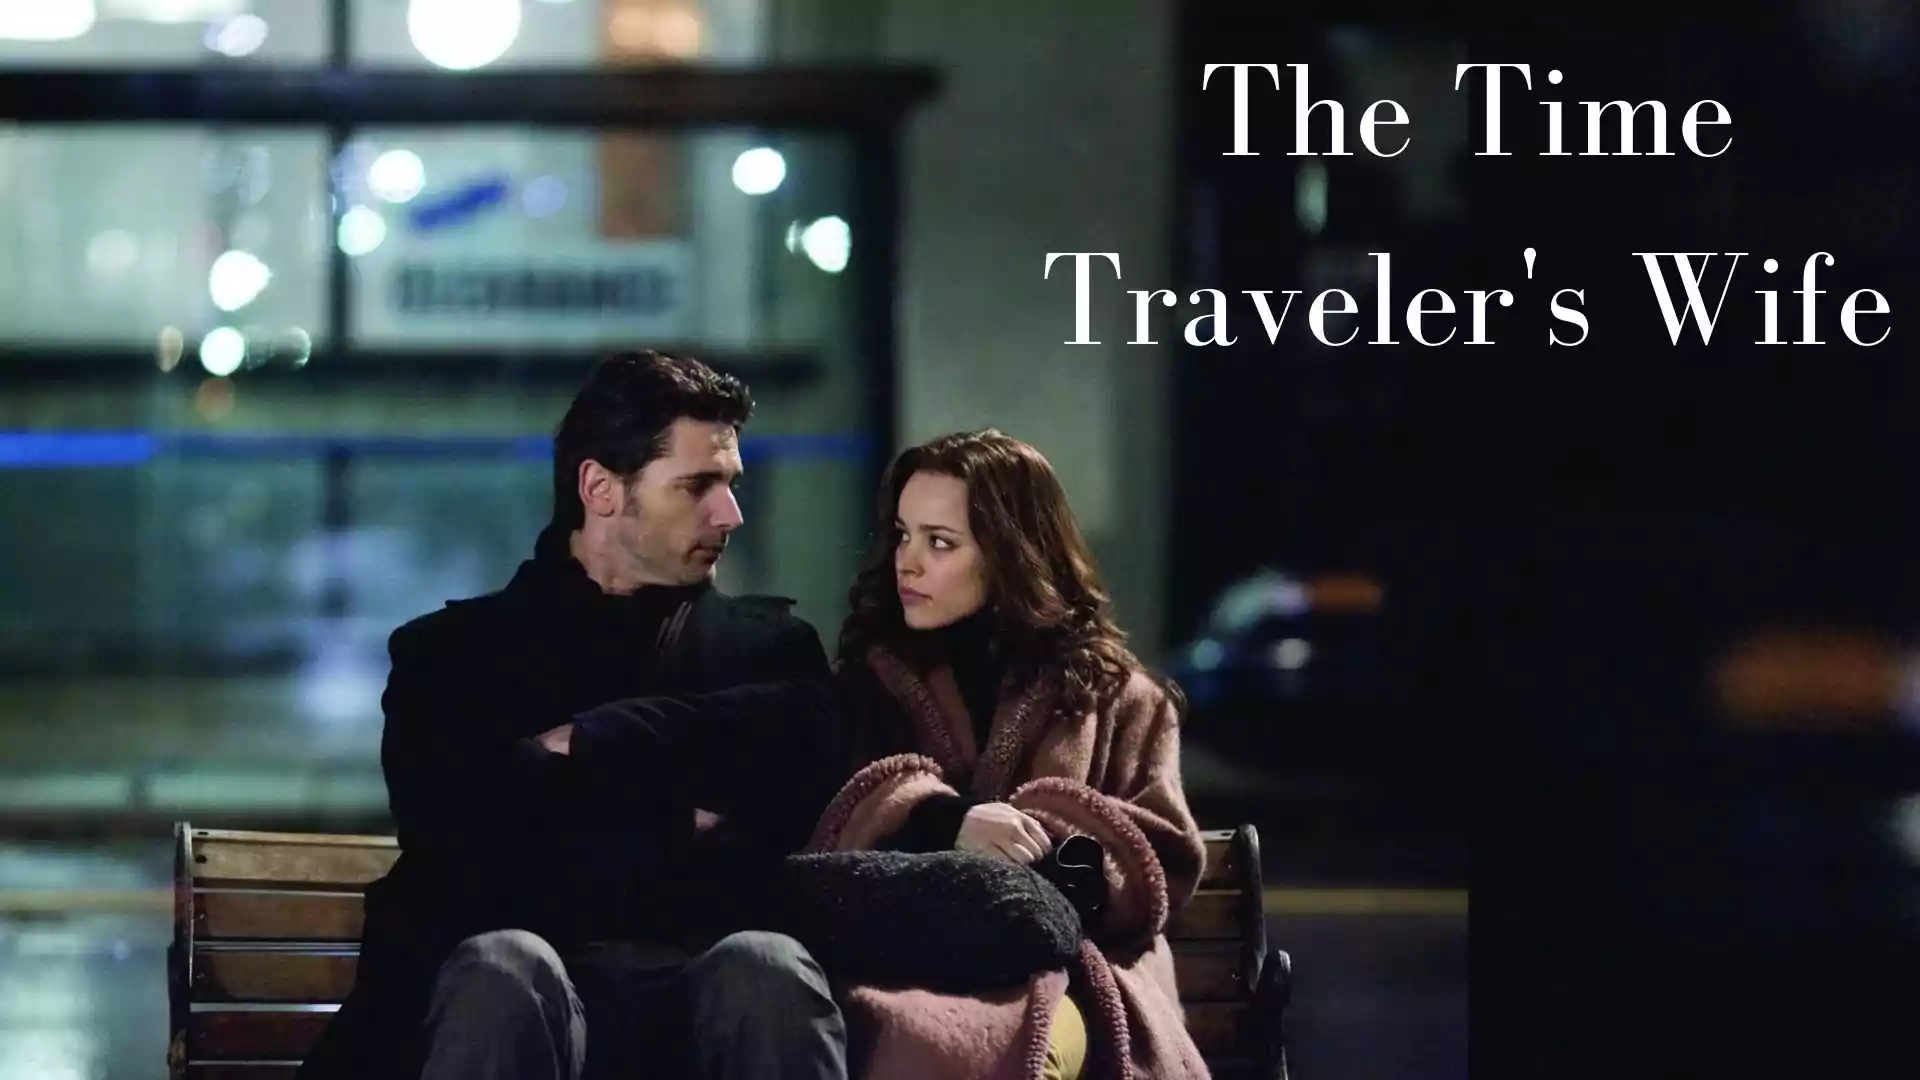 The Time Traveler's Wife Parents Guide. The Time Traveler's Wife Age Rating. 2020 HBO series The Time Traveler's Wife release date, overview, cast.